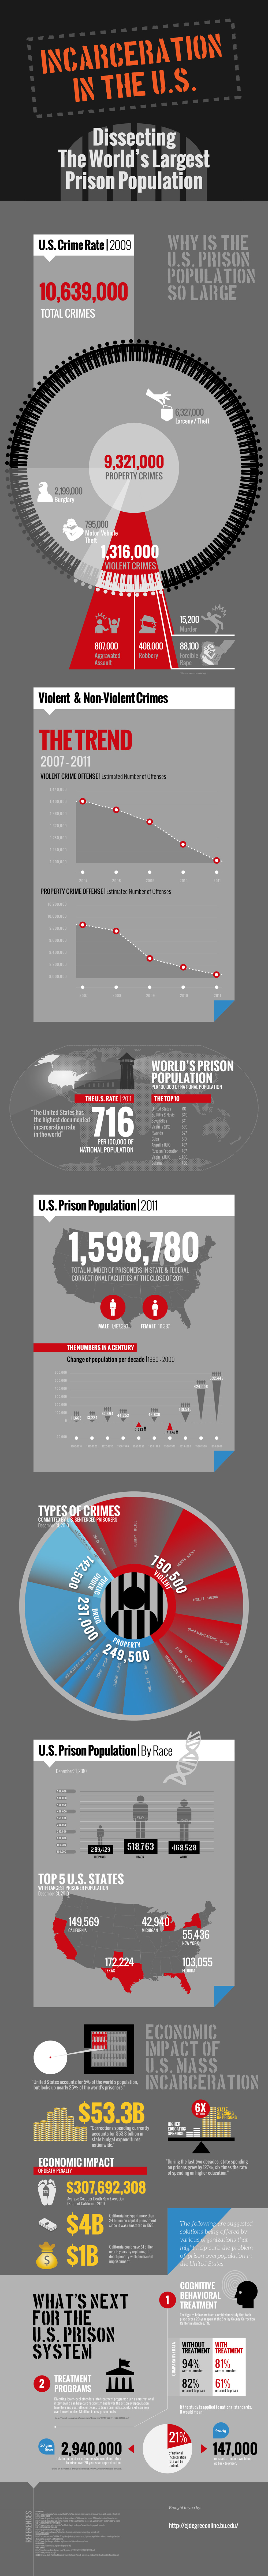 Incarceration in the US: Dissecting the World's Largest Prison Population